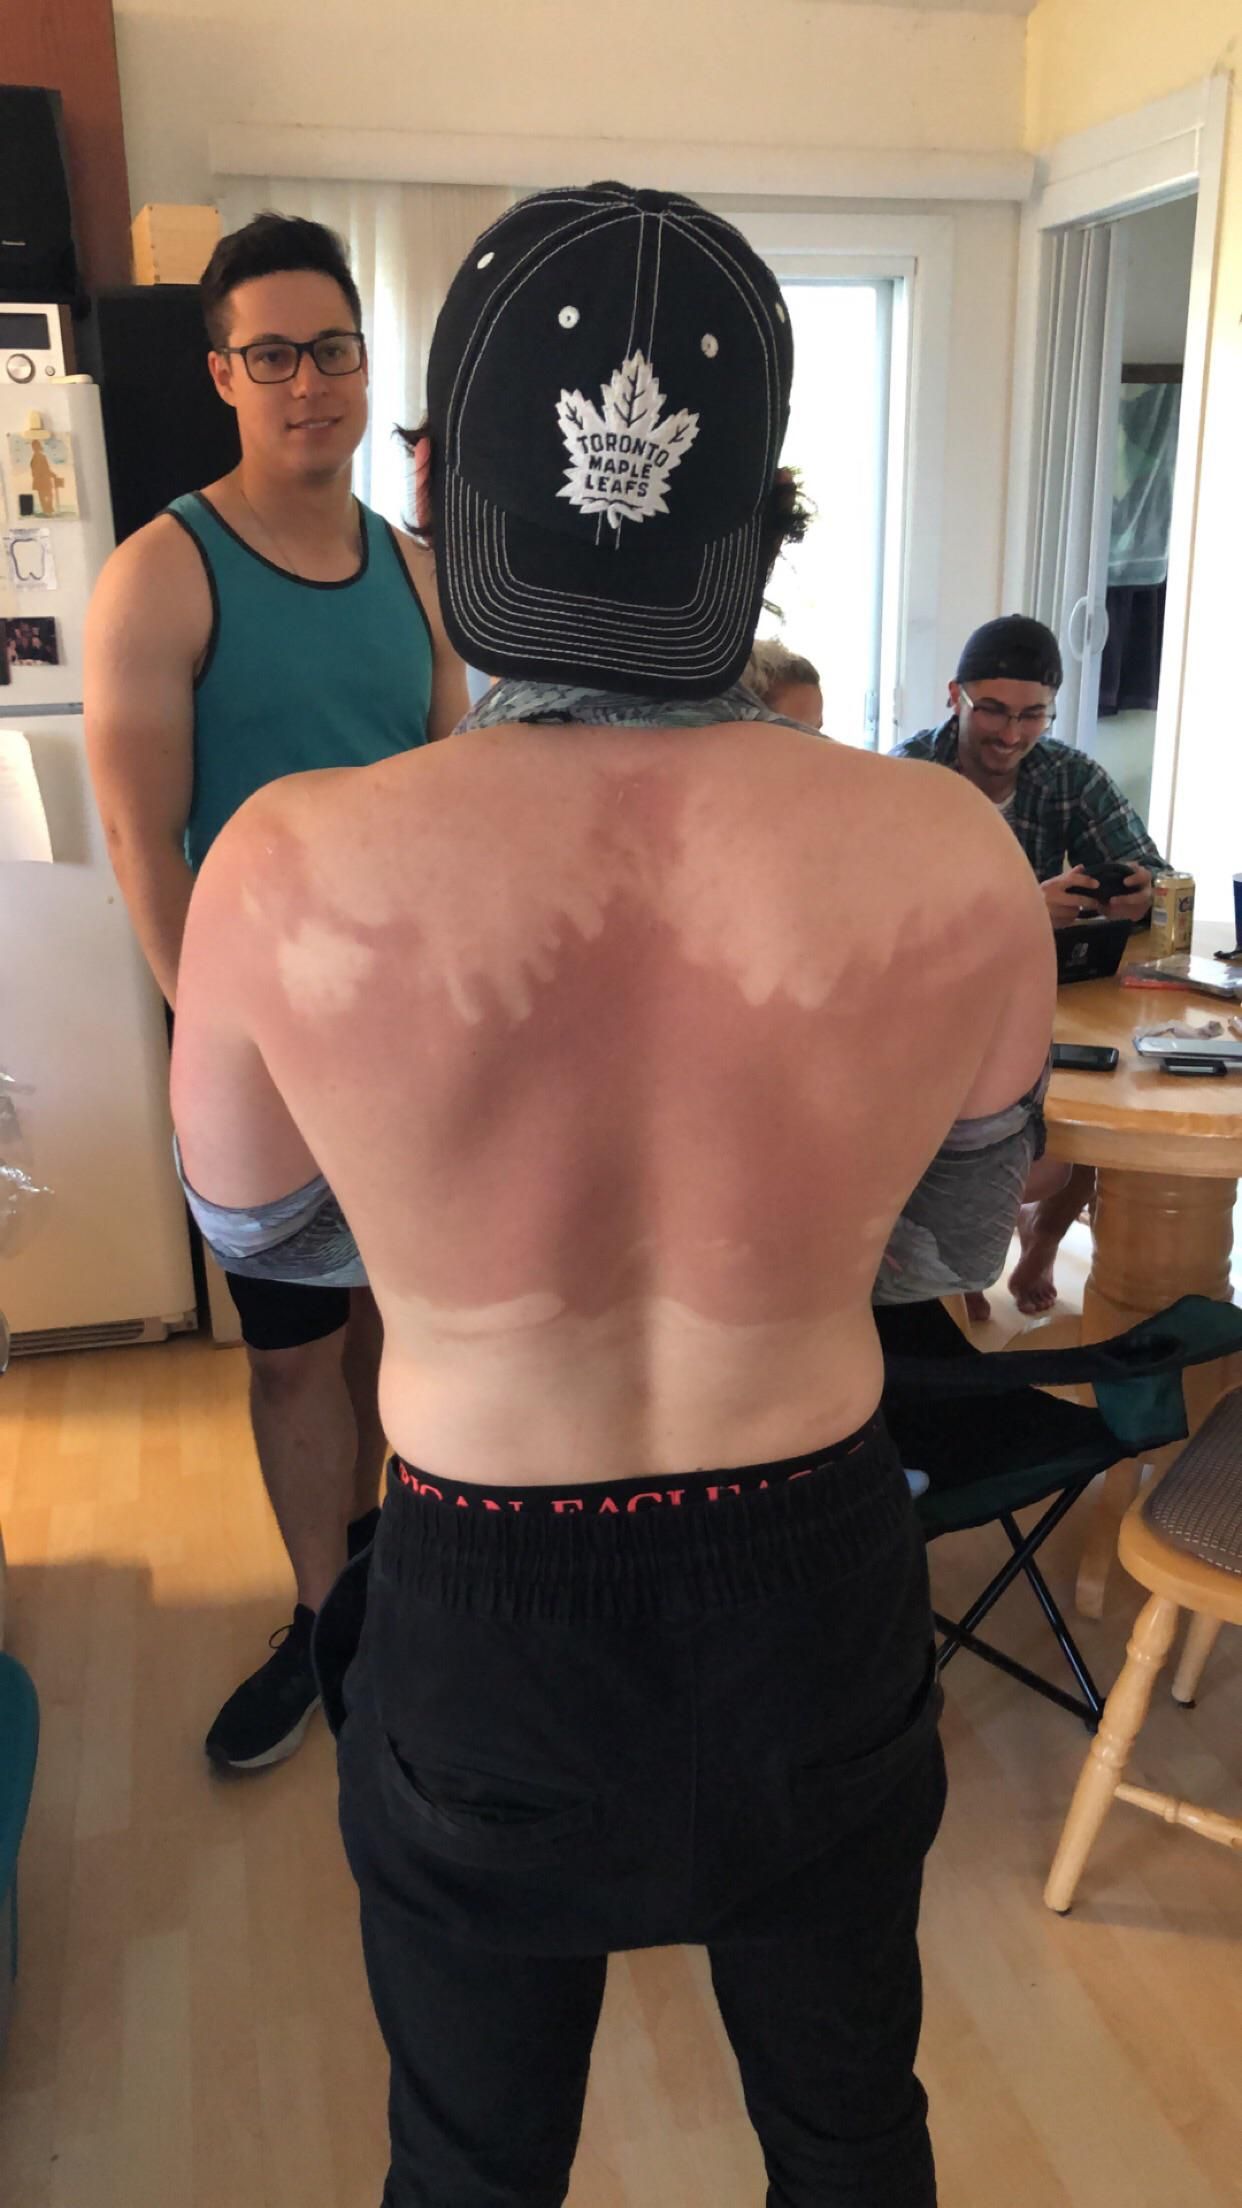 My friend refused to ask for help with putting sunscreen on, this is the result.